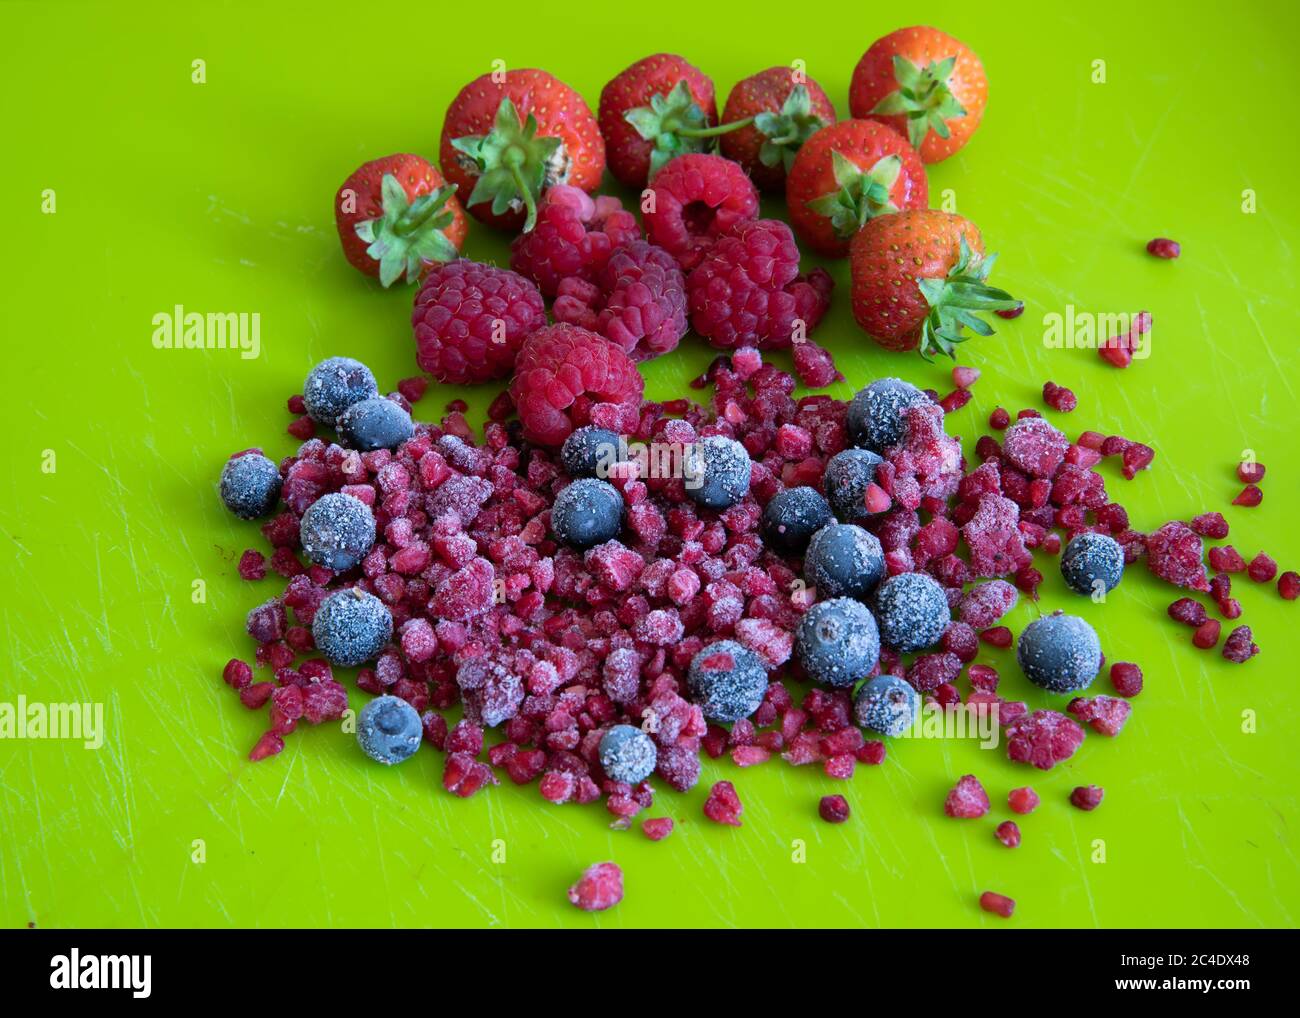 A selection of Fresh and frozen Fruits on a bright green chopping board Stock Photo